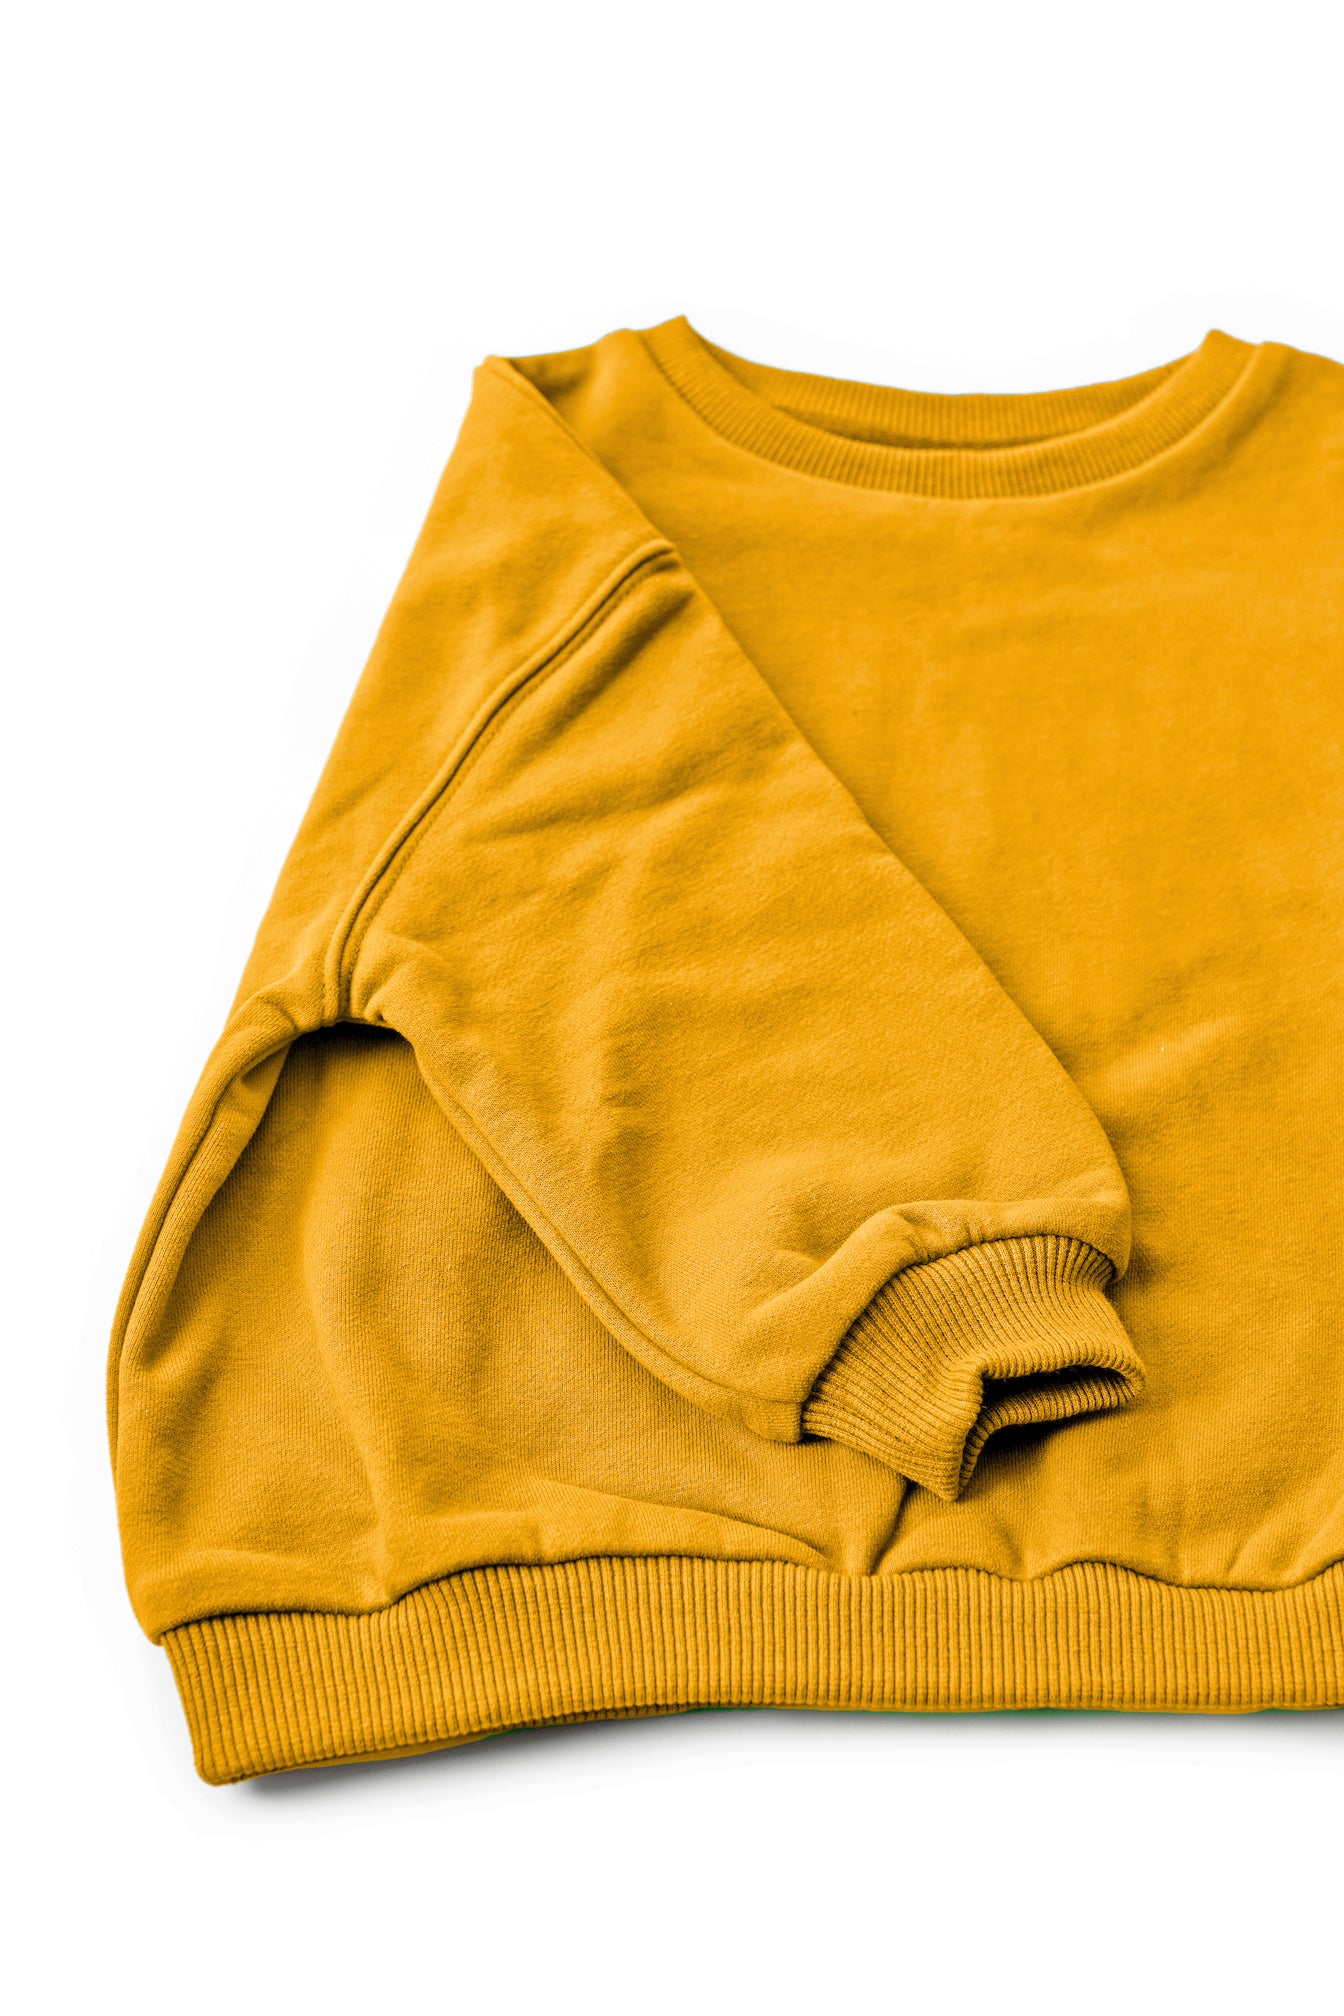 Butter - Kylo Play Sweater - FINAL SALE